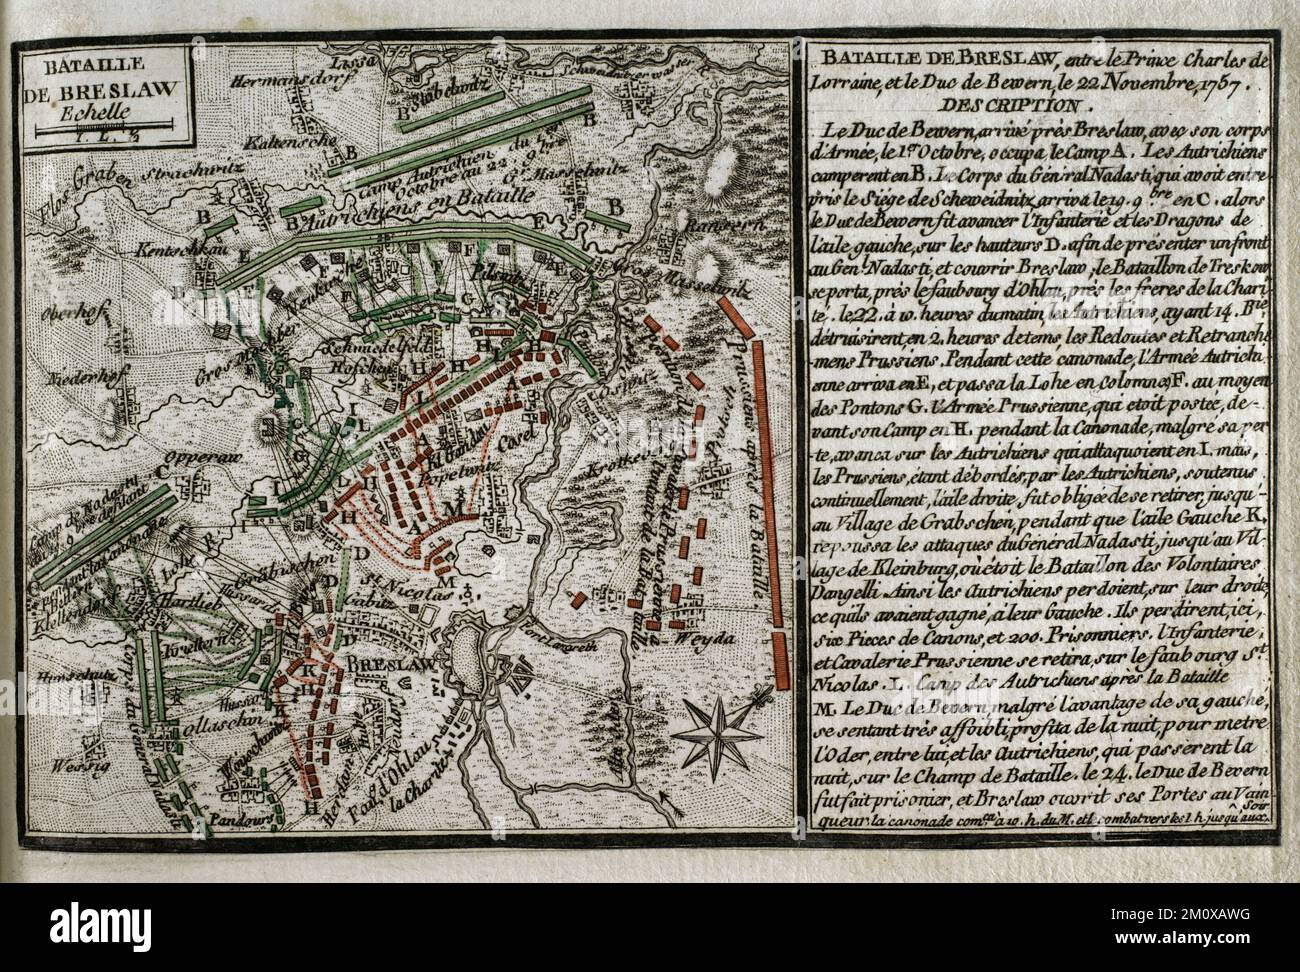 Seven Years War (1756-1763). Third Silesian War. Map of the Battle of Breslau, 1757 (November 22, 1757). Prussian troops under the command of August Wilhelm, Duke of Brunswick-Bevern, were defeated by an Austrian army led by Charles Alexander of Lorraine. Published in 1765 by the cartographer Jean de Beaurain (1696-1771) as an illustration of his Great Map of Germany, with the events that took place during the Seven Years War. Etching and engraving. French edition, 1765. Military Historical Library of Barcelona (Biblioteca Histórico Militar de Barcelona). Catalonia. Spain. Stock Photo